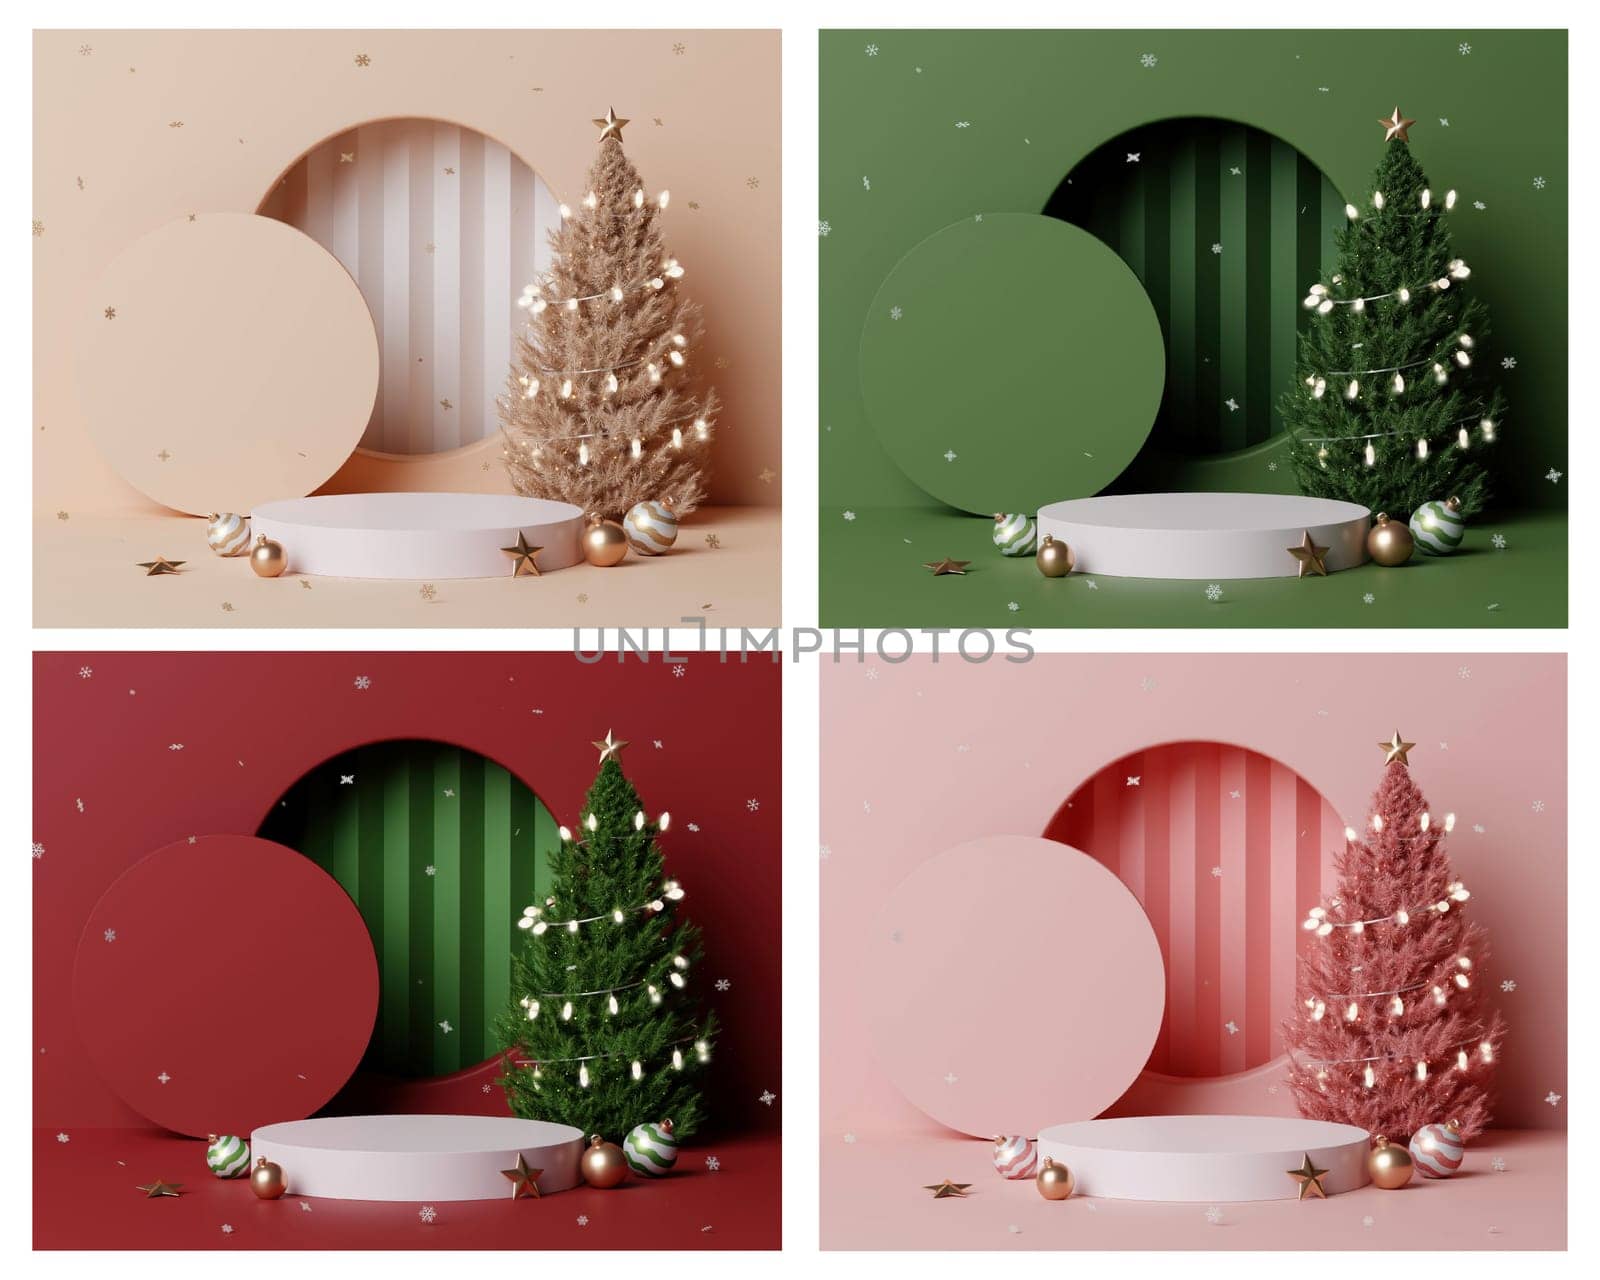 3d Christmas tree podium. Realistic 3d with 4 design stage podium. Decorative festive elements glass bauble balls. Xmas holiday template podium..